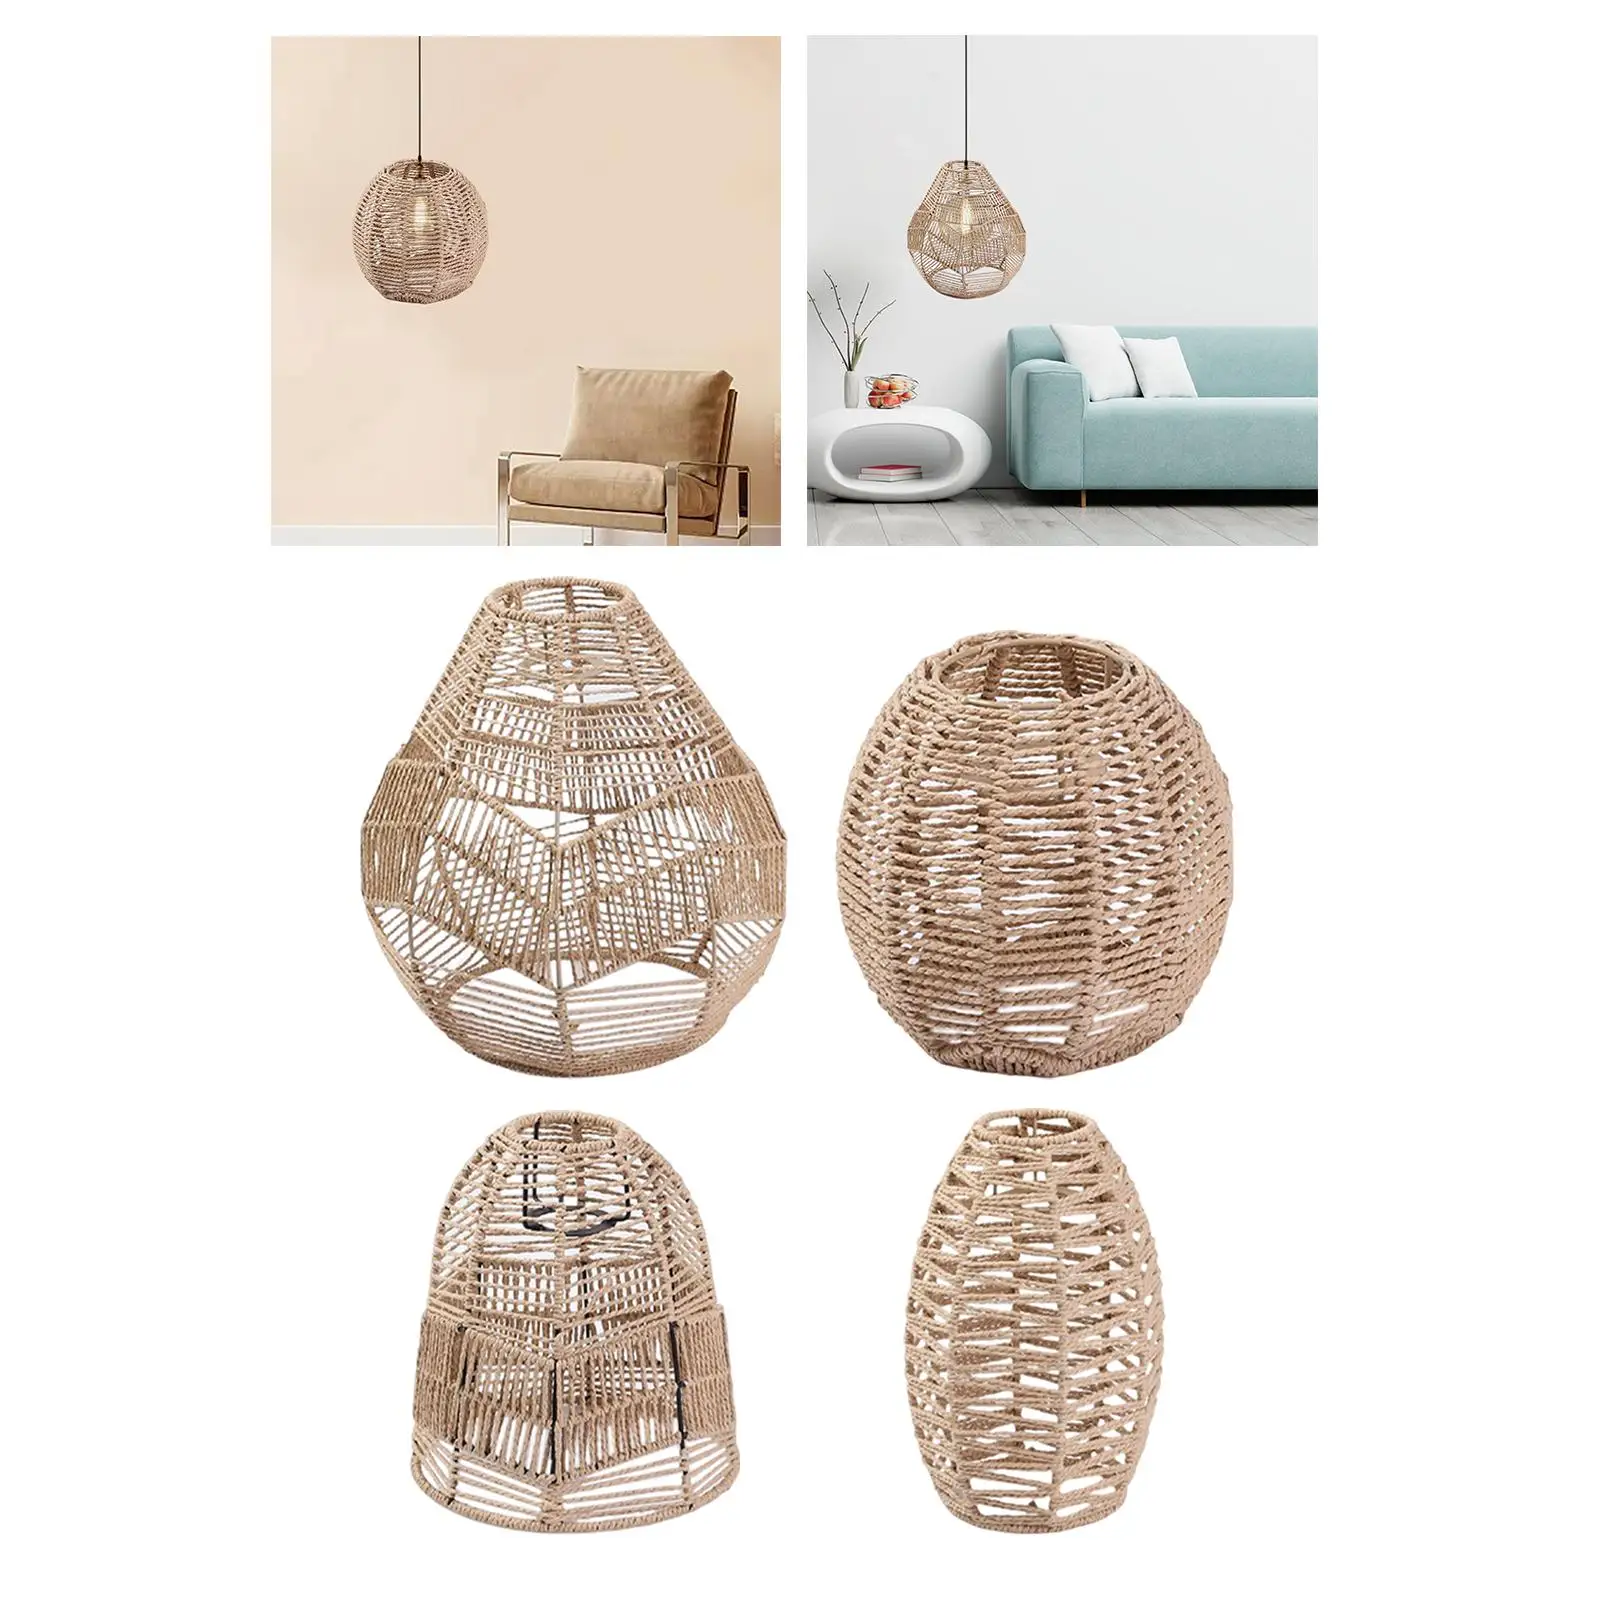 4x Wicker Pendant Lamp Shade Chandelier Cover for Living Room Kitchen Island